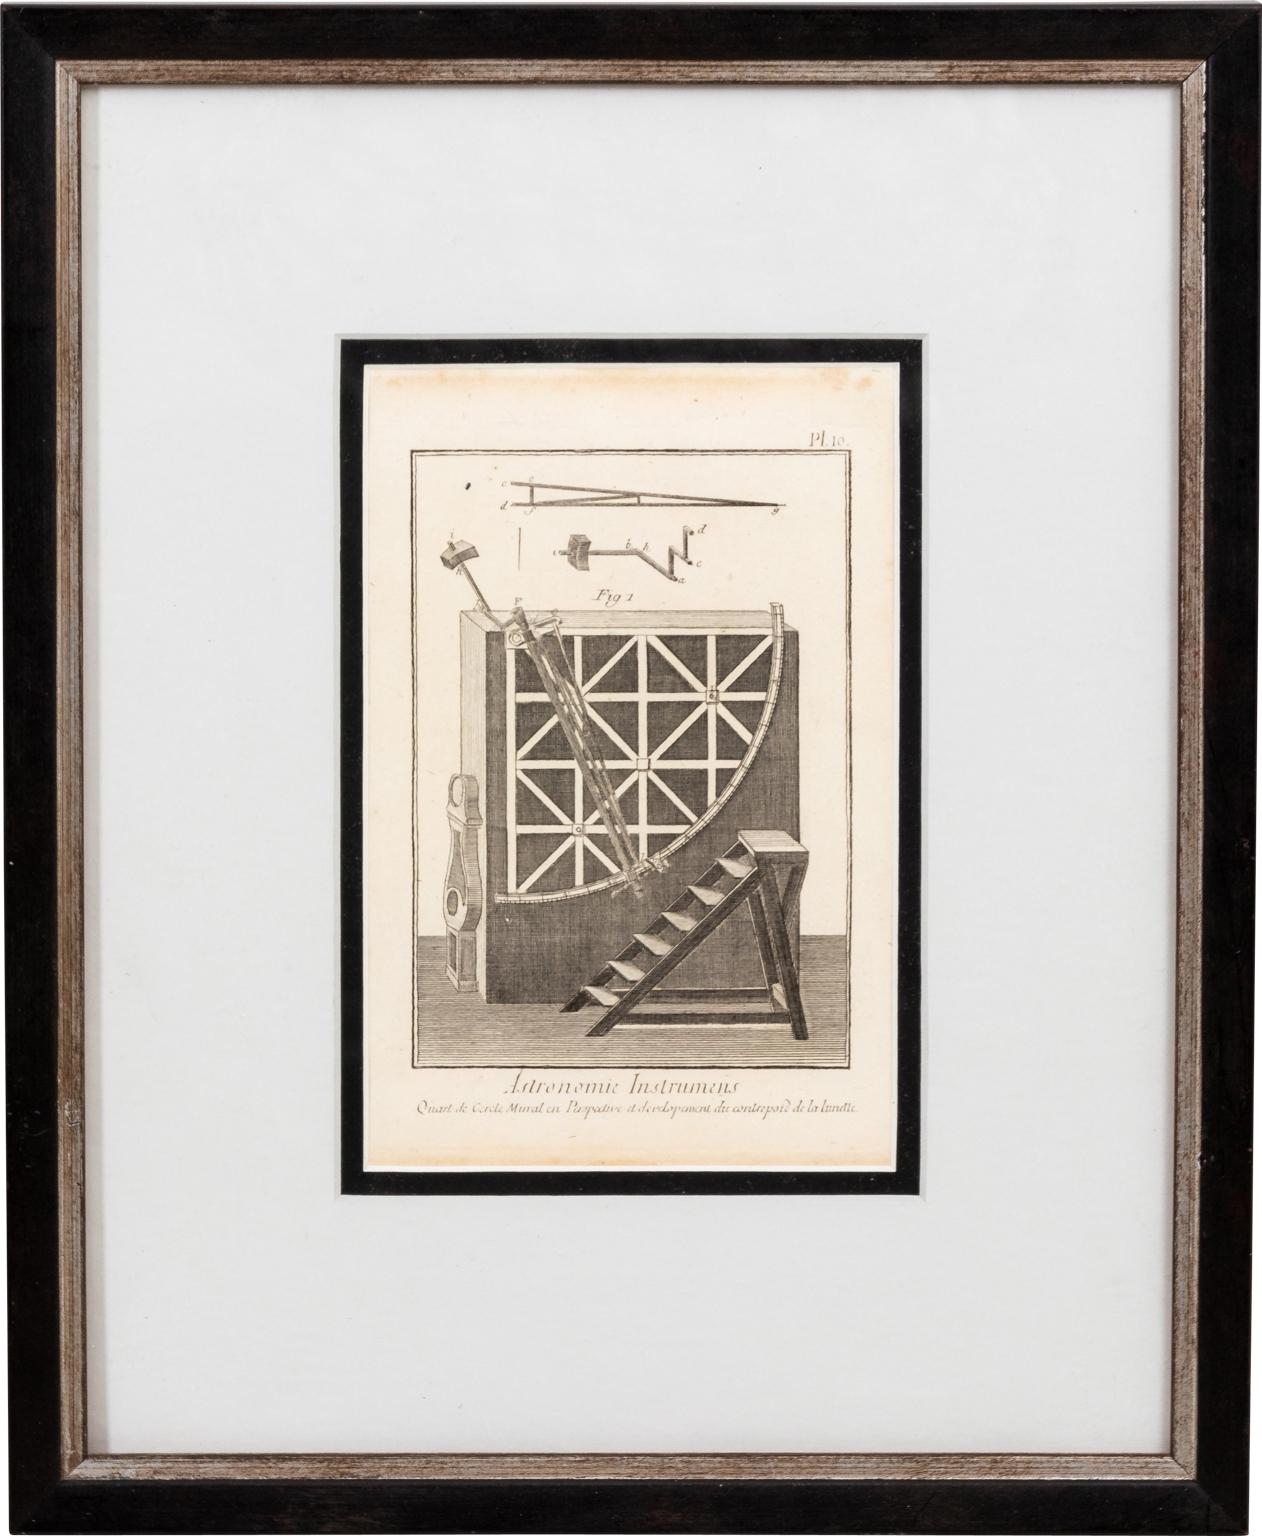 20th Century Set of Nine Framed Astronomic Instruments Architectural Prints